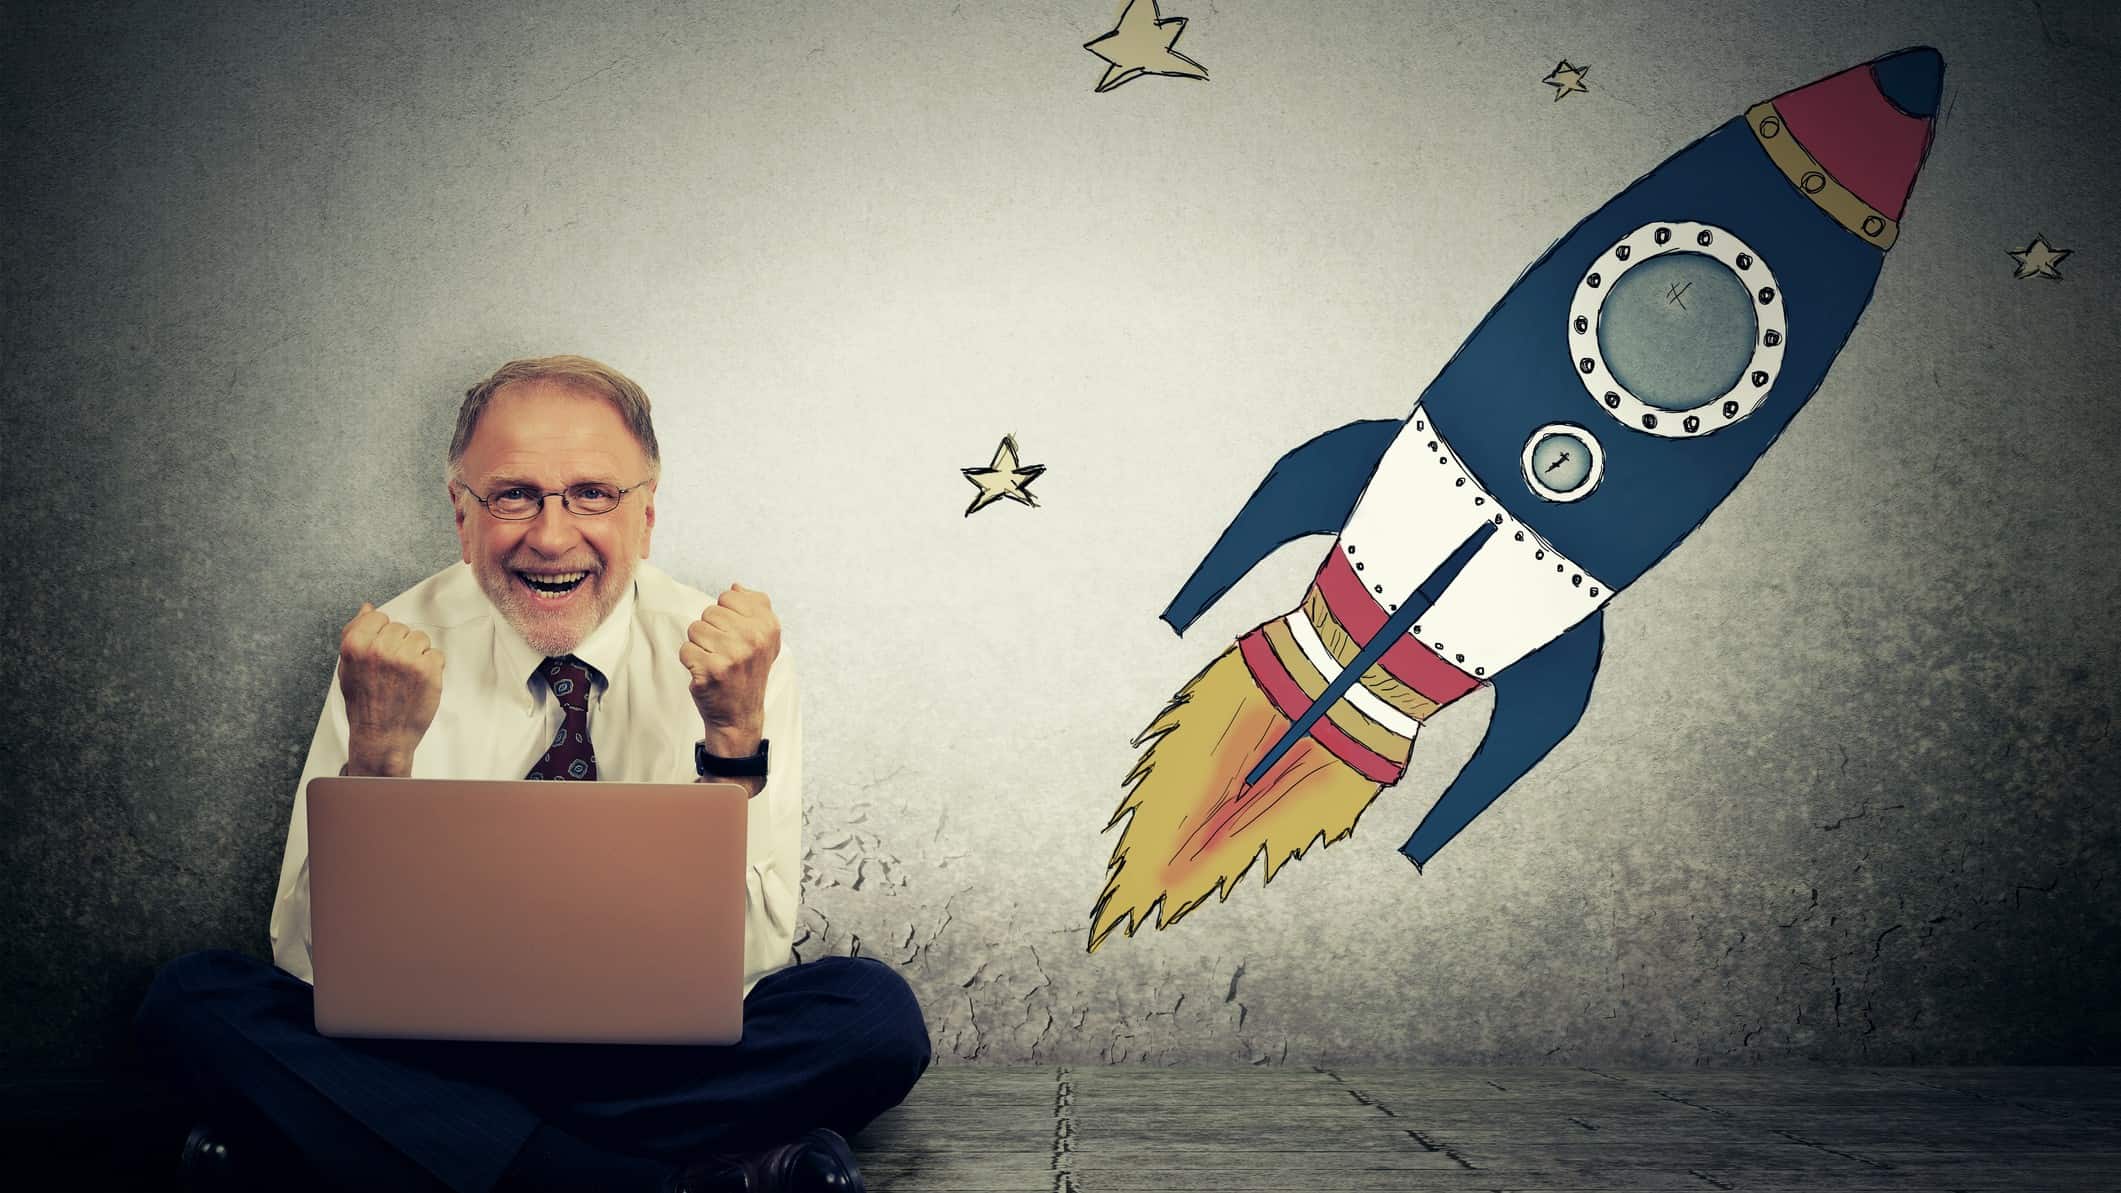 A male ASX investor sits cross-legged with a laptop computer in his lap with a slightly crazed, happy, excited look on his face while next to him a graphic of a rocket shoots upwards with graphics of stars scattered around it